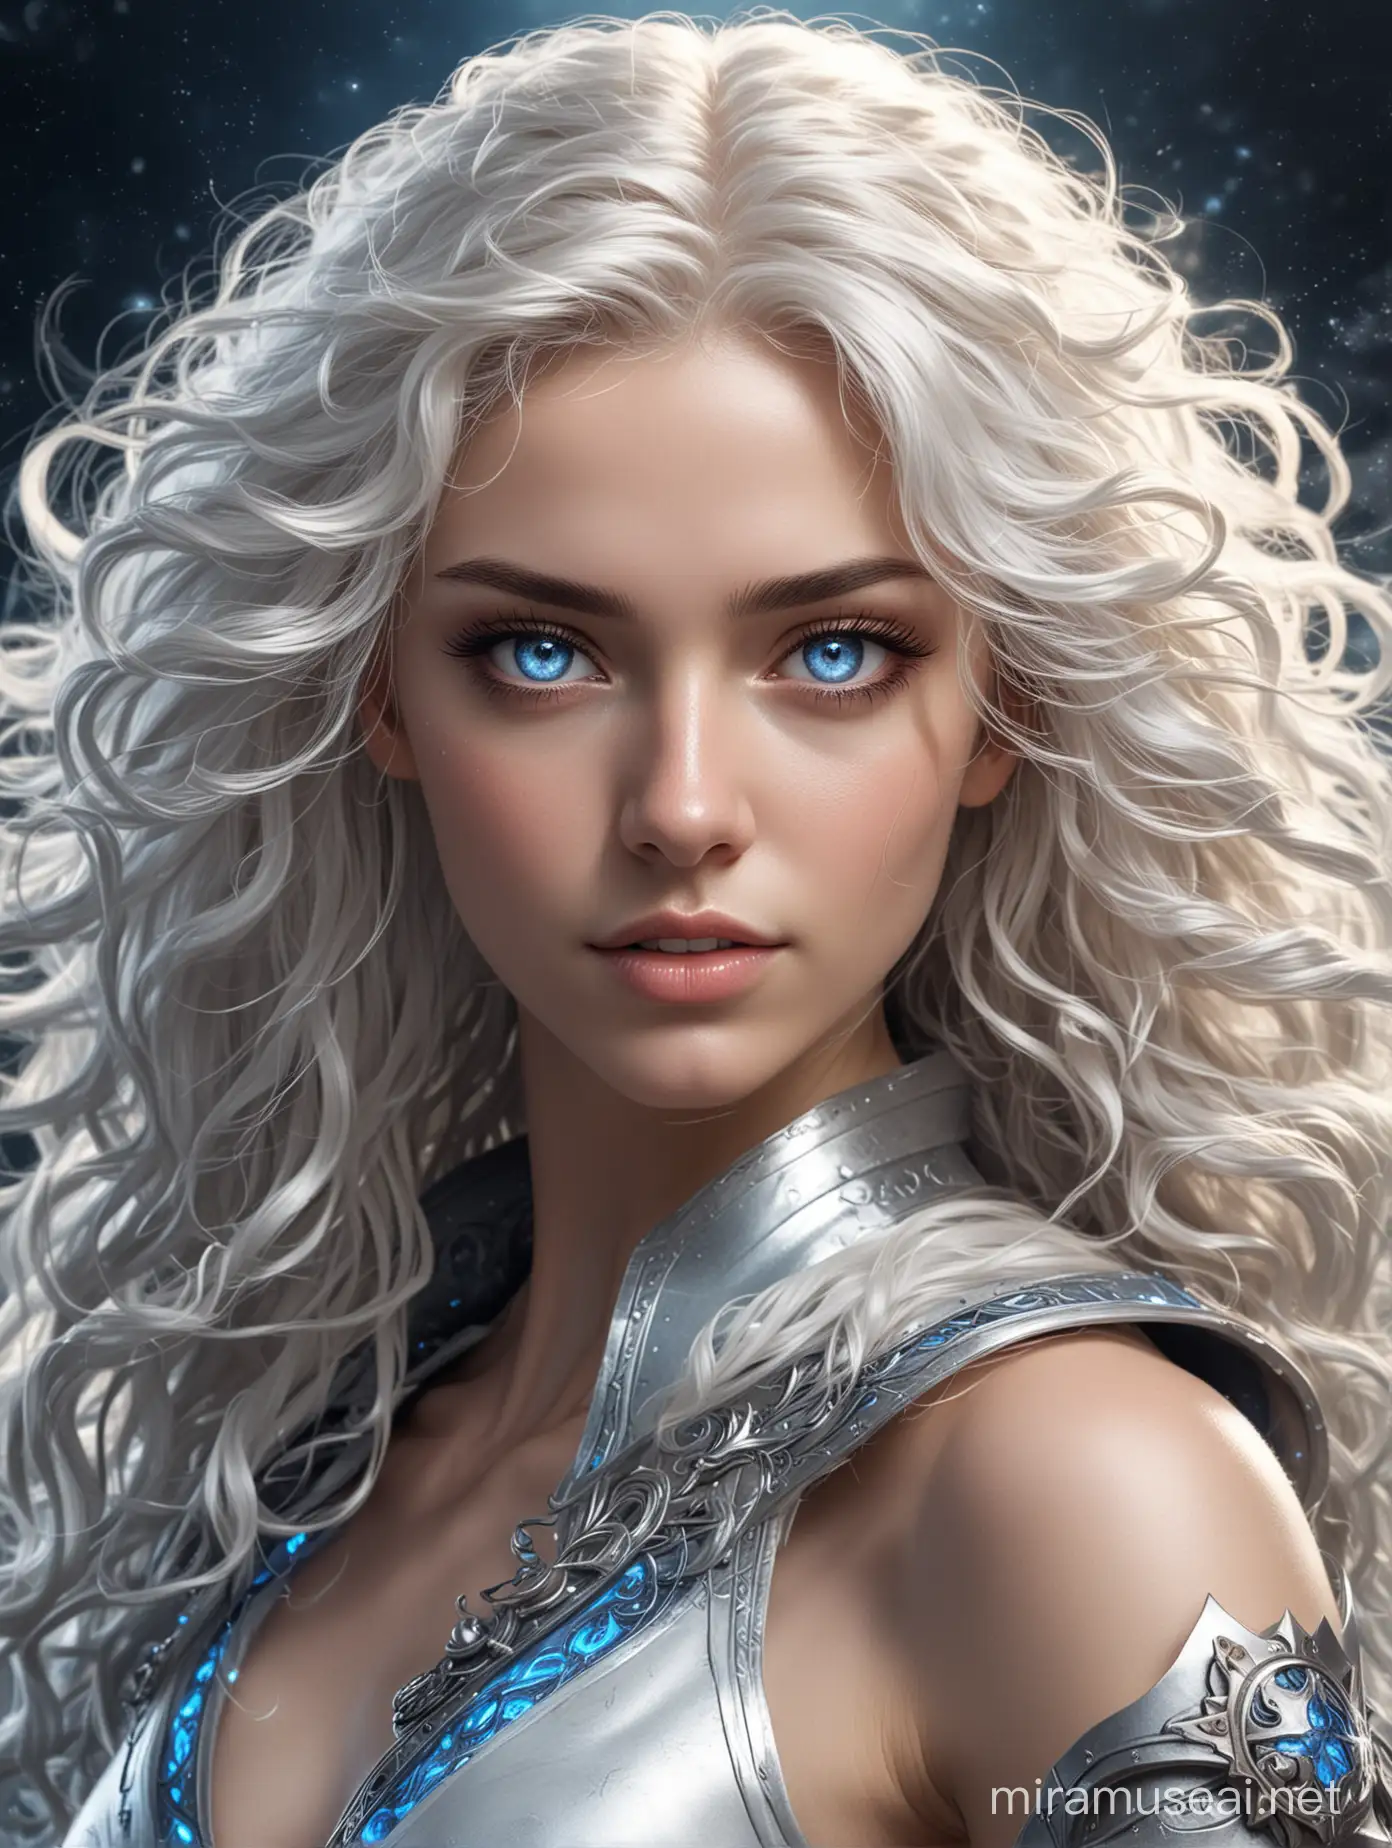 Radiant Celestial Warrior with Glowing Blue Eyes and Curly White Hair